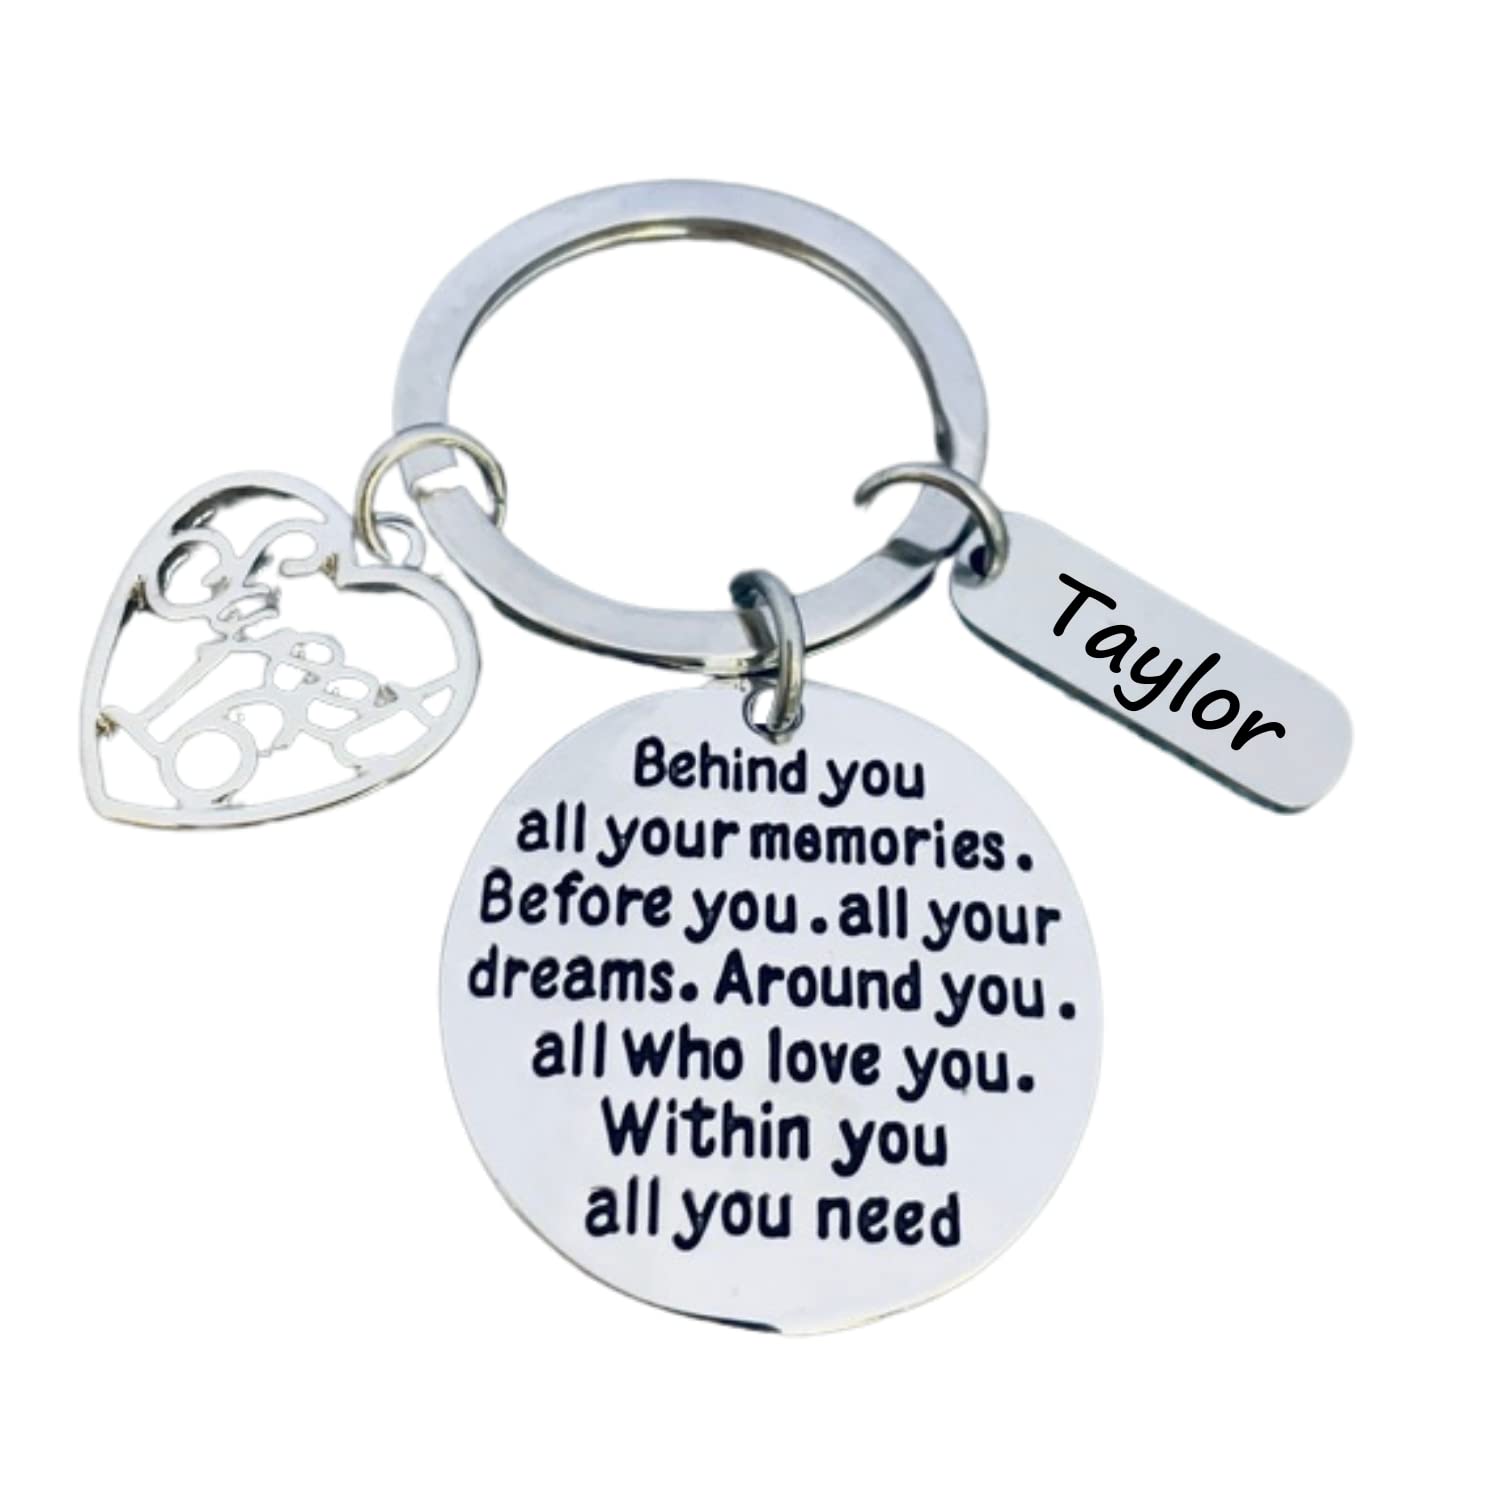 Personalized Inspirational Brave Tag Engraved Sweet 16 Charm Keychain Gift for Birthday Girl